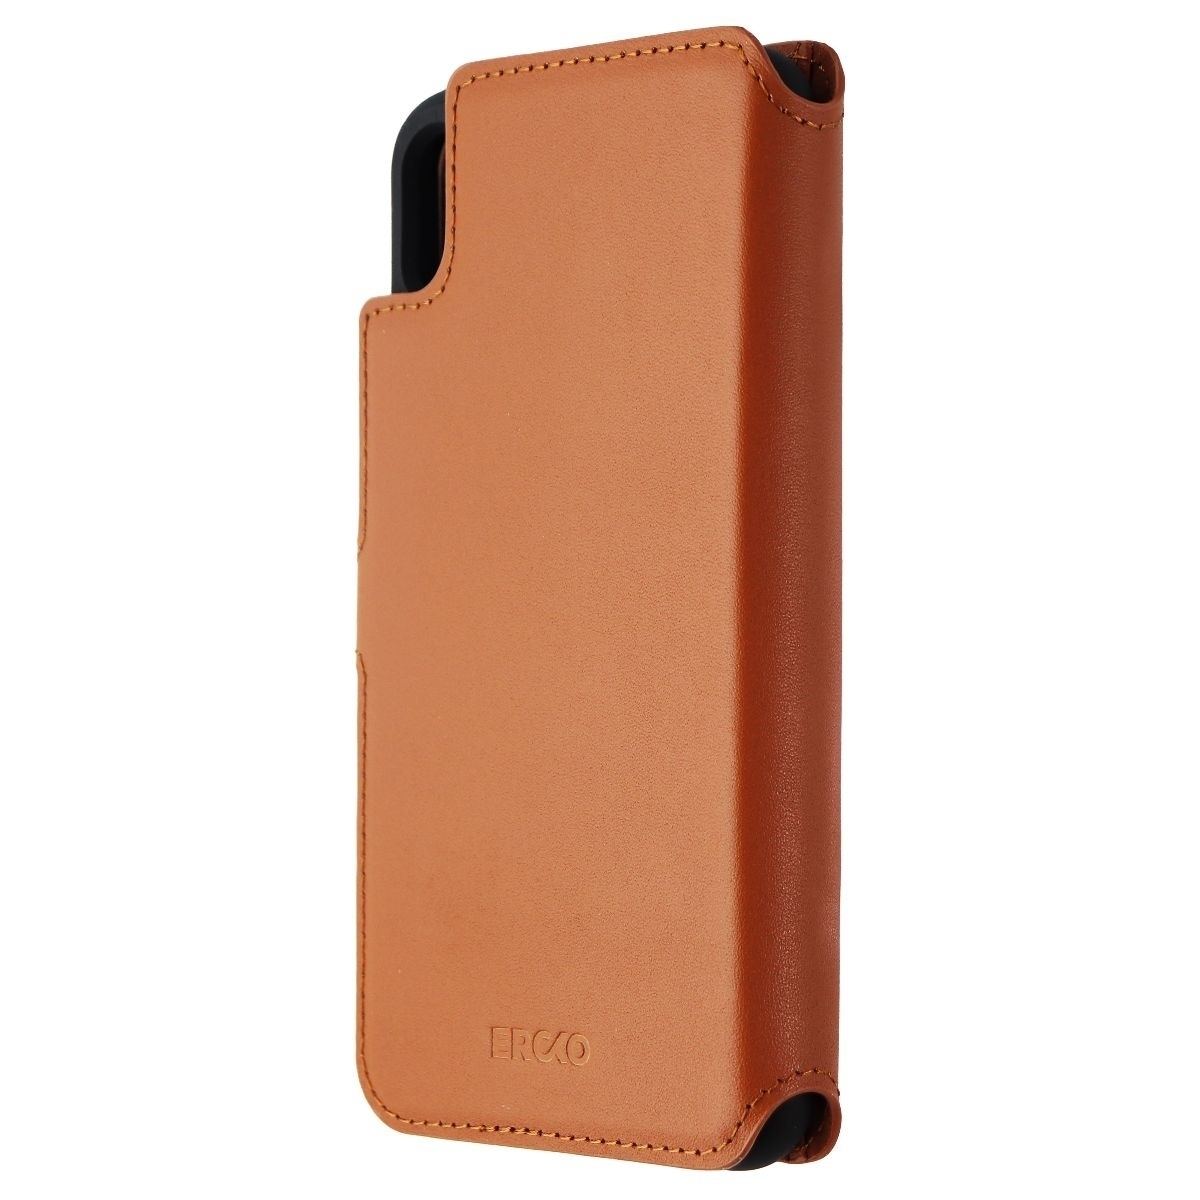 Ercko 2-in1 Magnet Wallet And Case For Apple IPhone Xs Max - Brown/Black